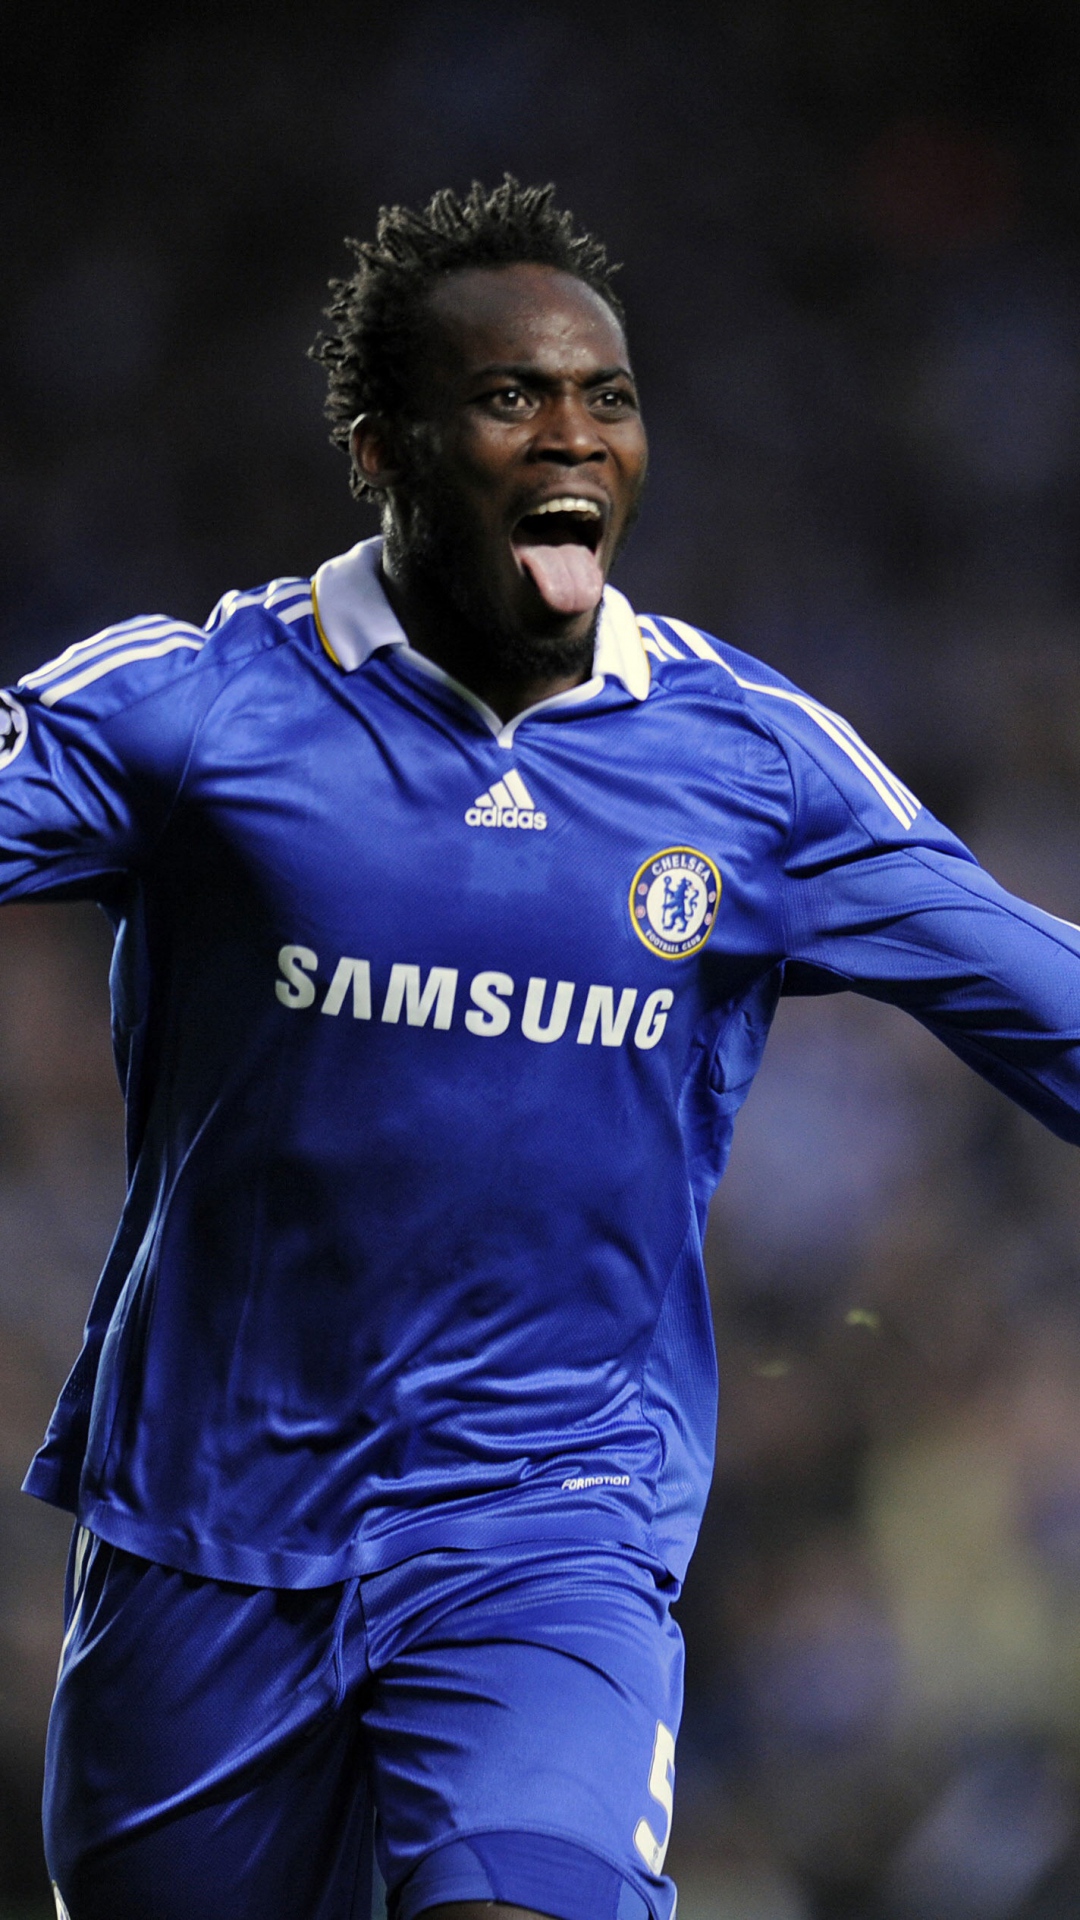 wallpapers chelsea player,football player,player,team sport,ball game,sports